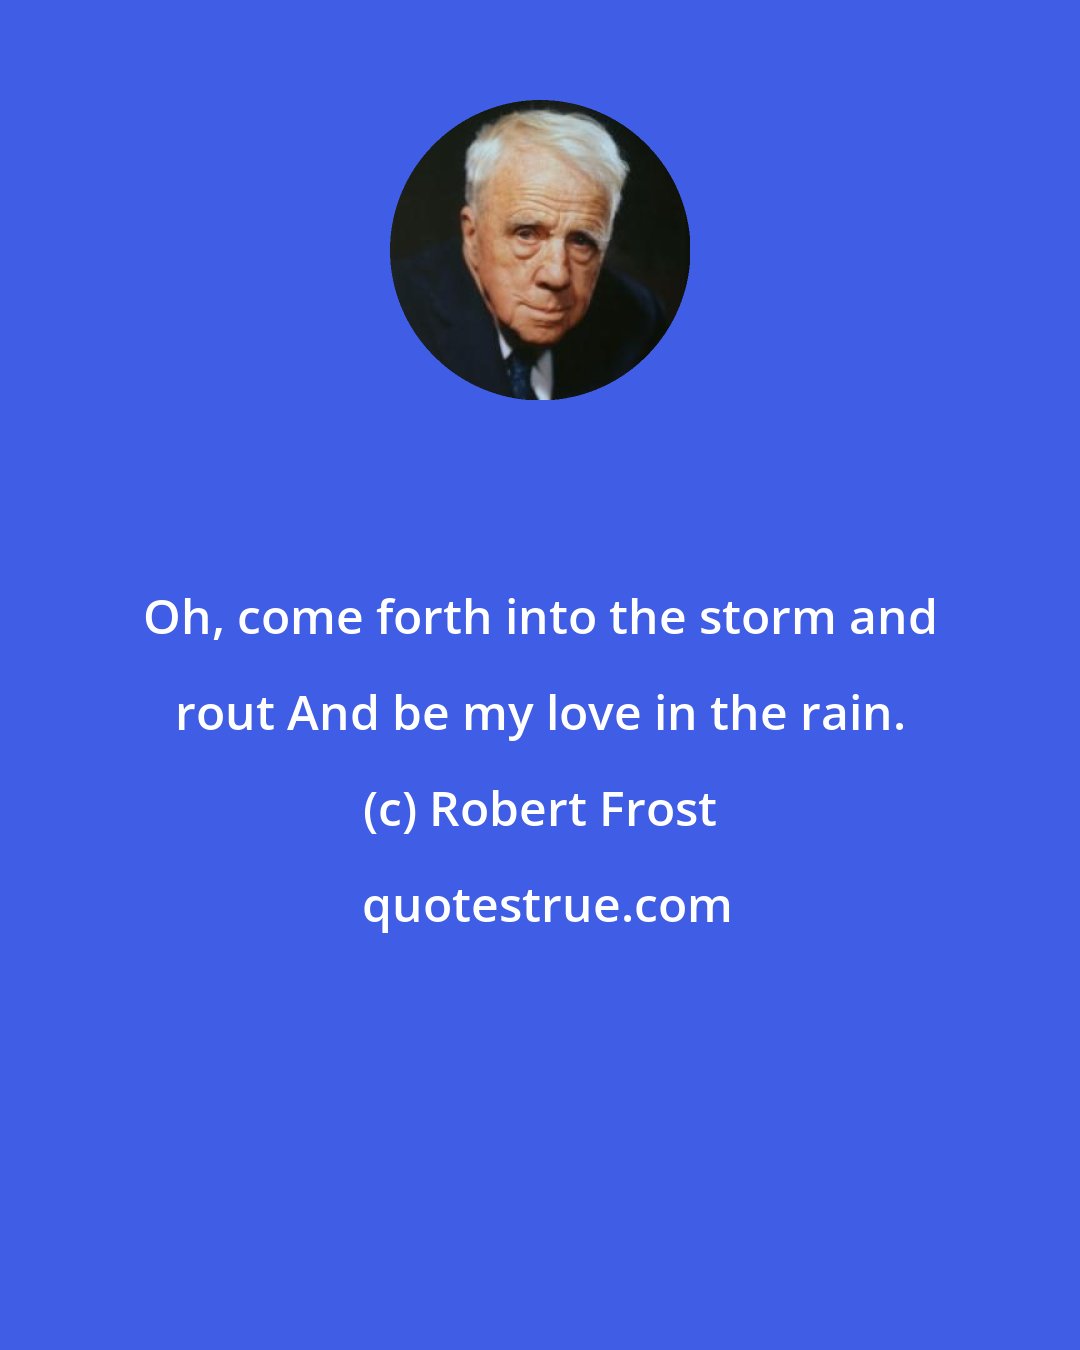 Robert Frost: Oh, come forth into the storm and rout And be my love in the rain.